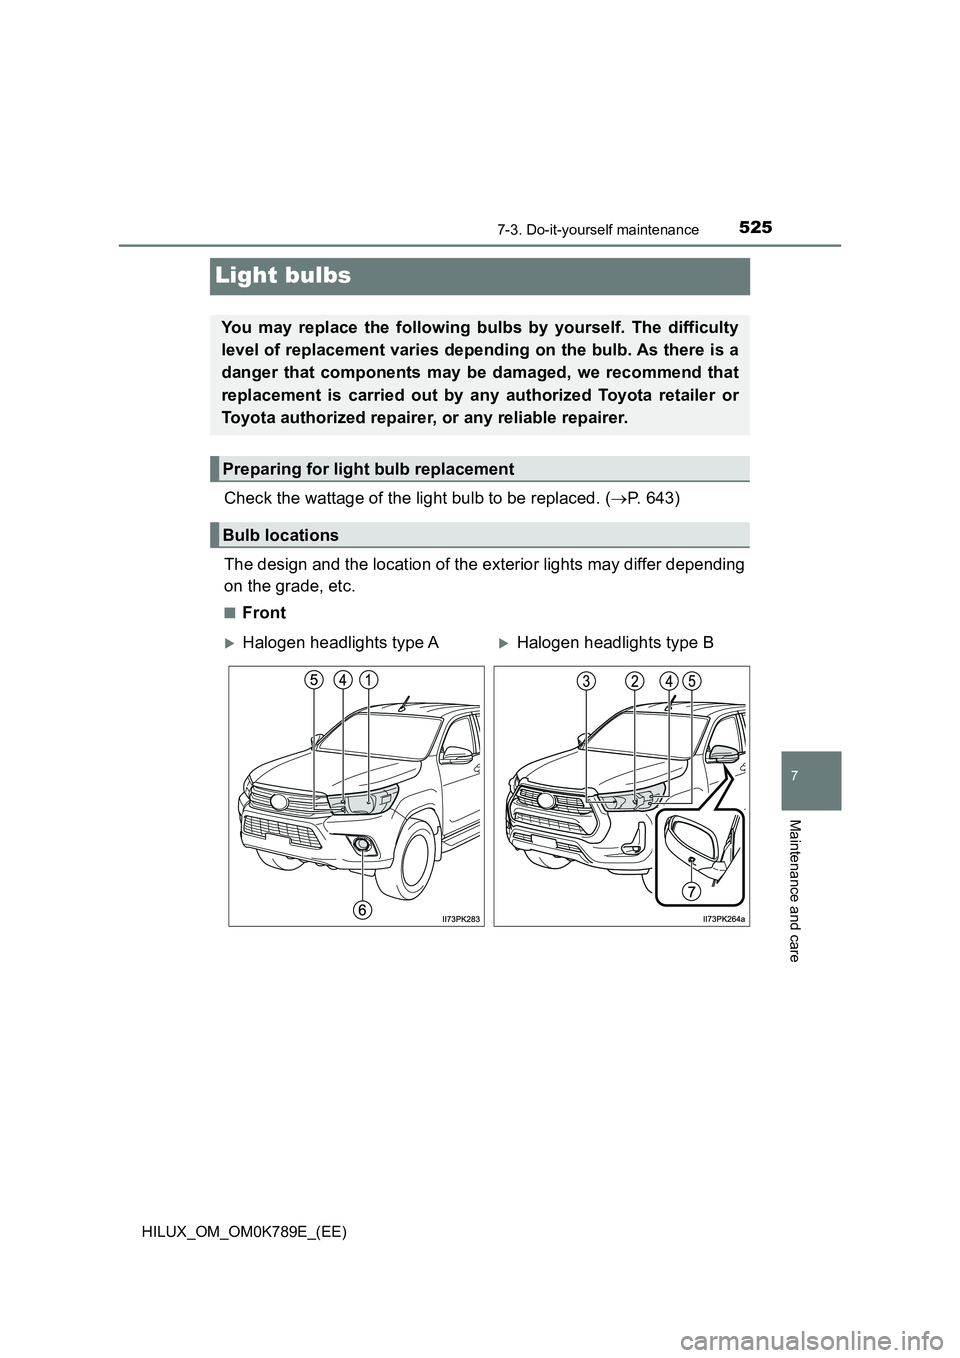 TOYOTA HILUX 2023  Owners Manual 5257-3. Do-it-yourself maintenance
HILUX_OM_OM0K789E_(EE)
7
Maintenance and care
Light bulbs
Check the wattage of the light bulb to be replaced. (P. 643) 
The design and the location of the exterio